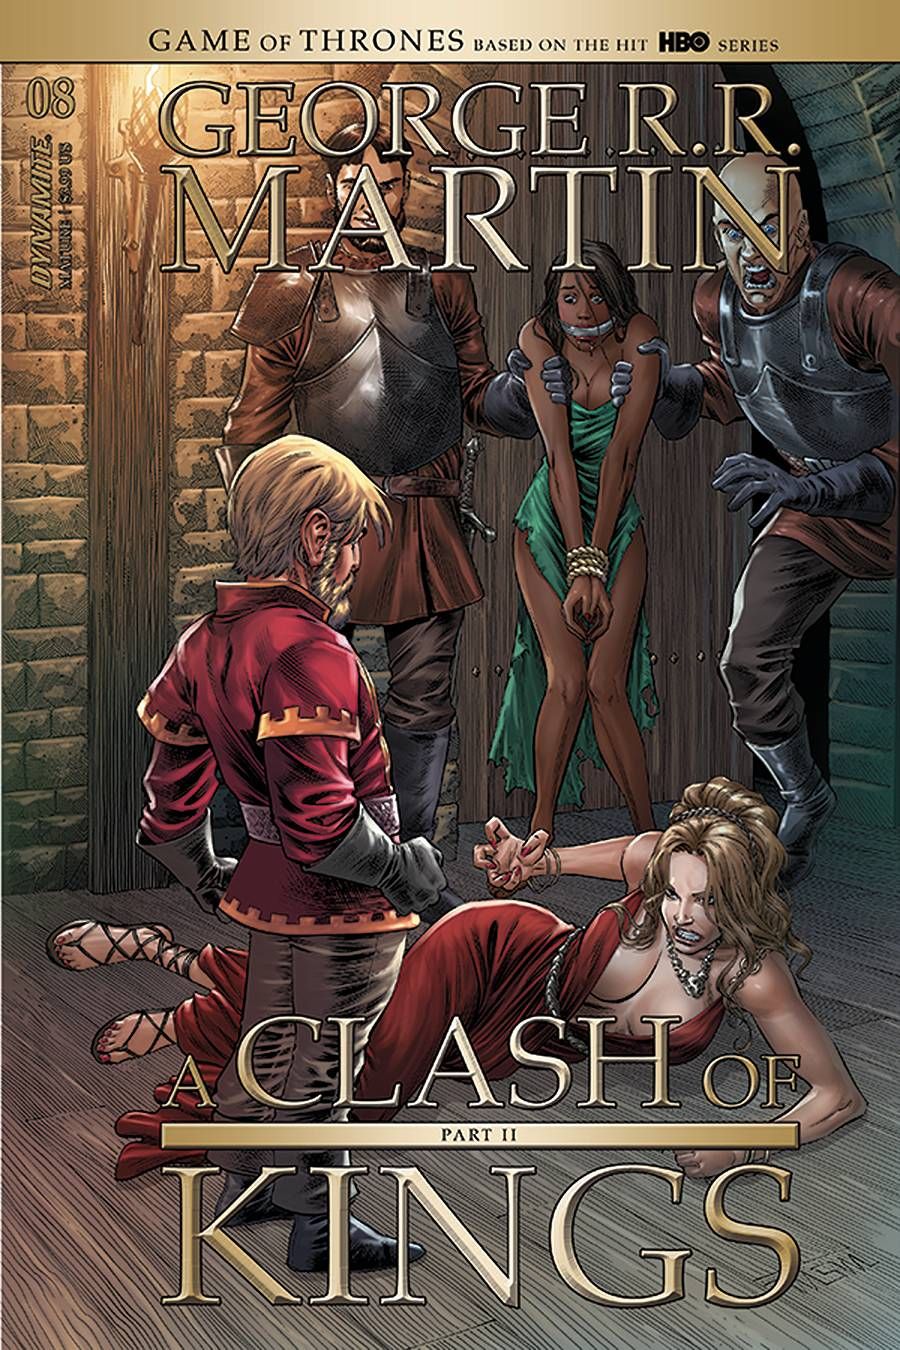 Game of Thrones: A Clash of Kings #10 Comic